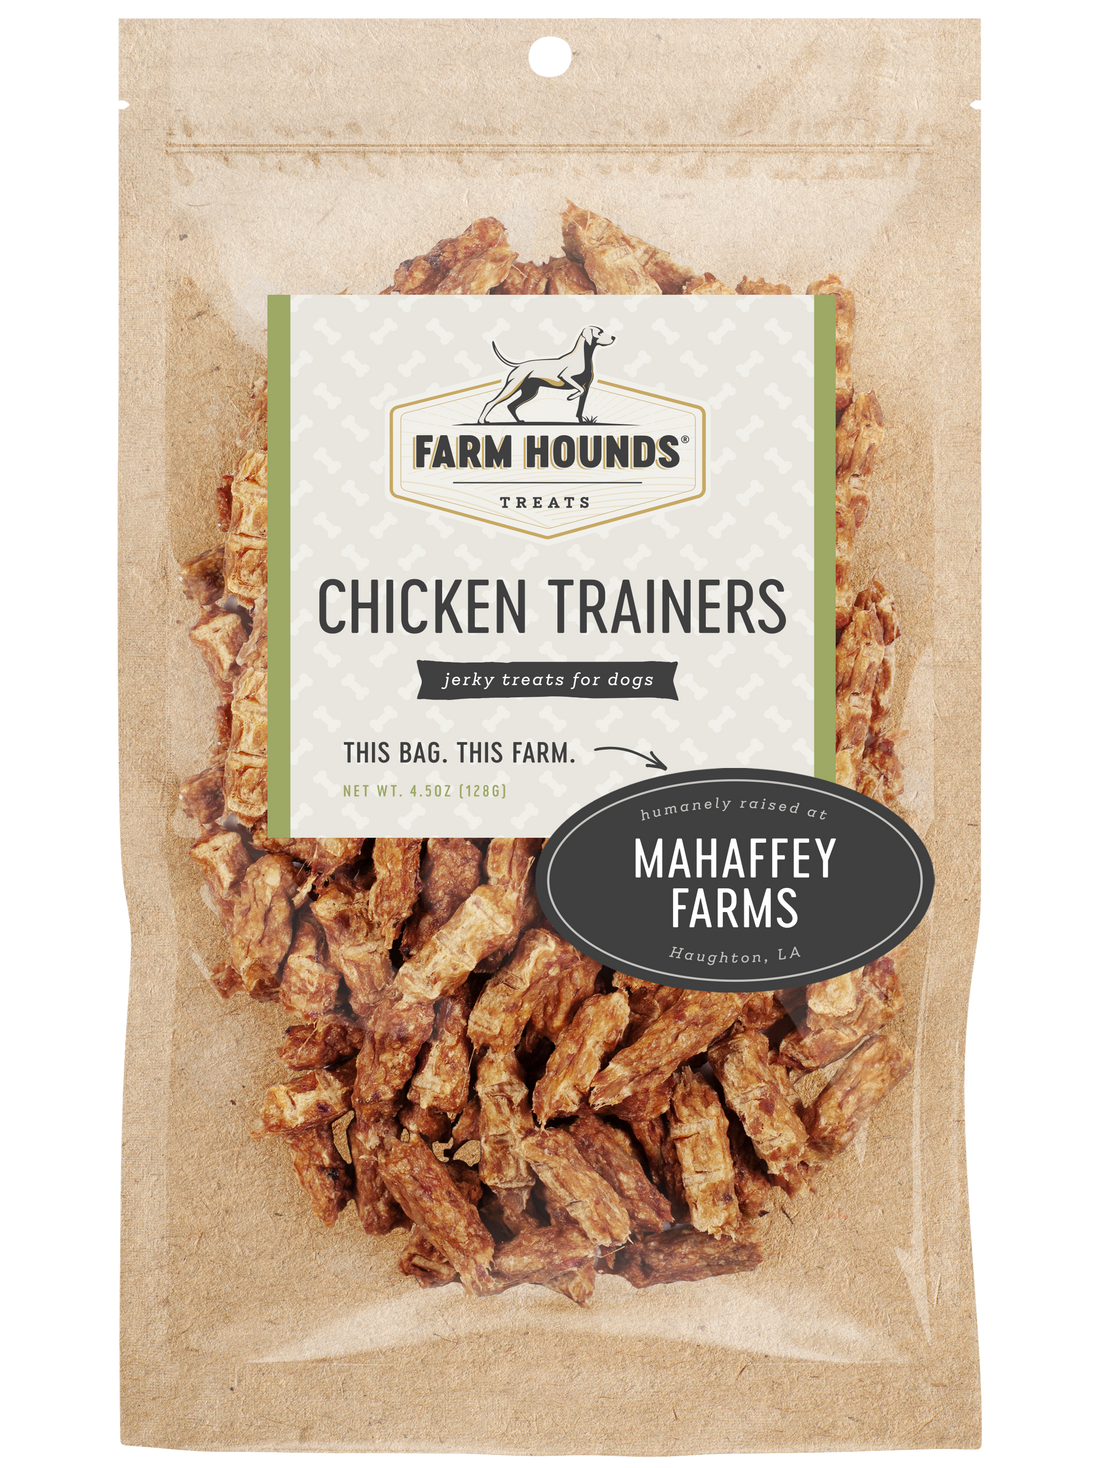 Farm Hounds Chicken Trainers